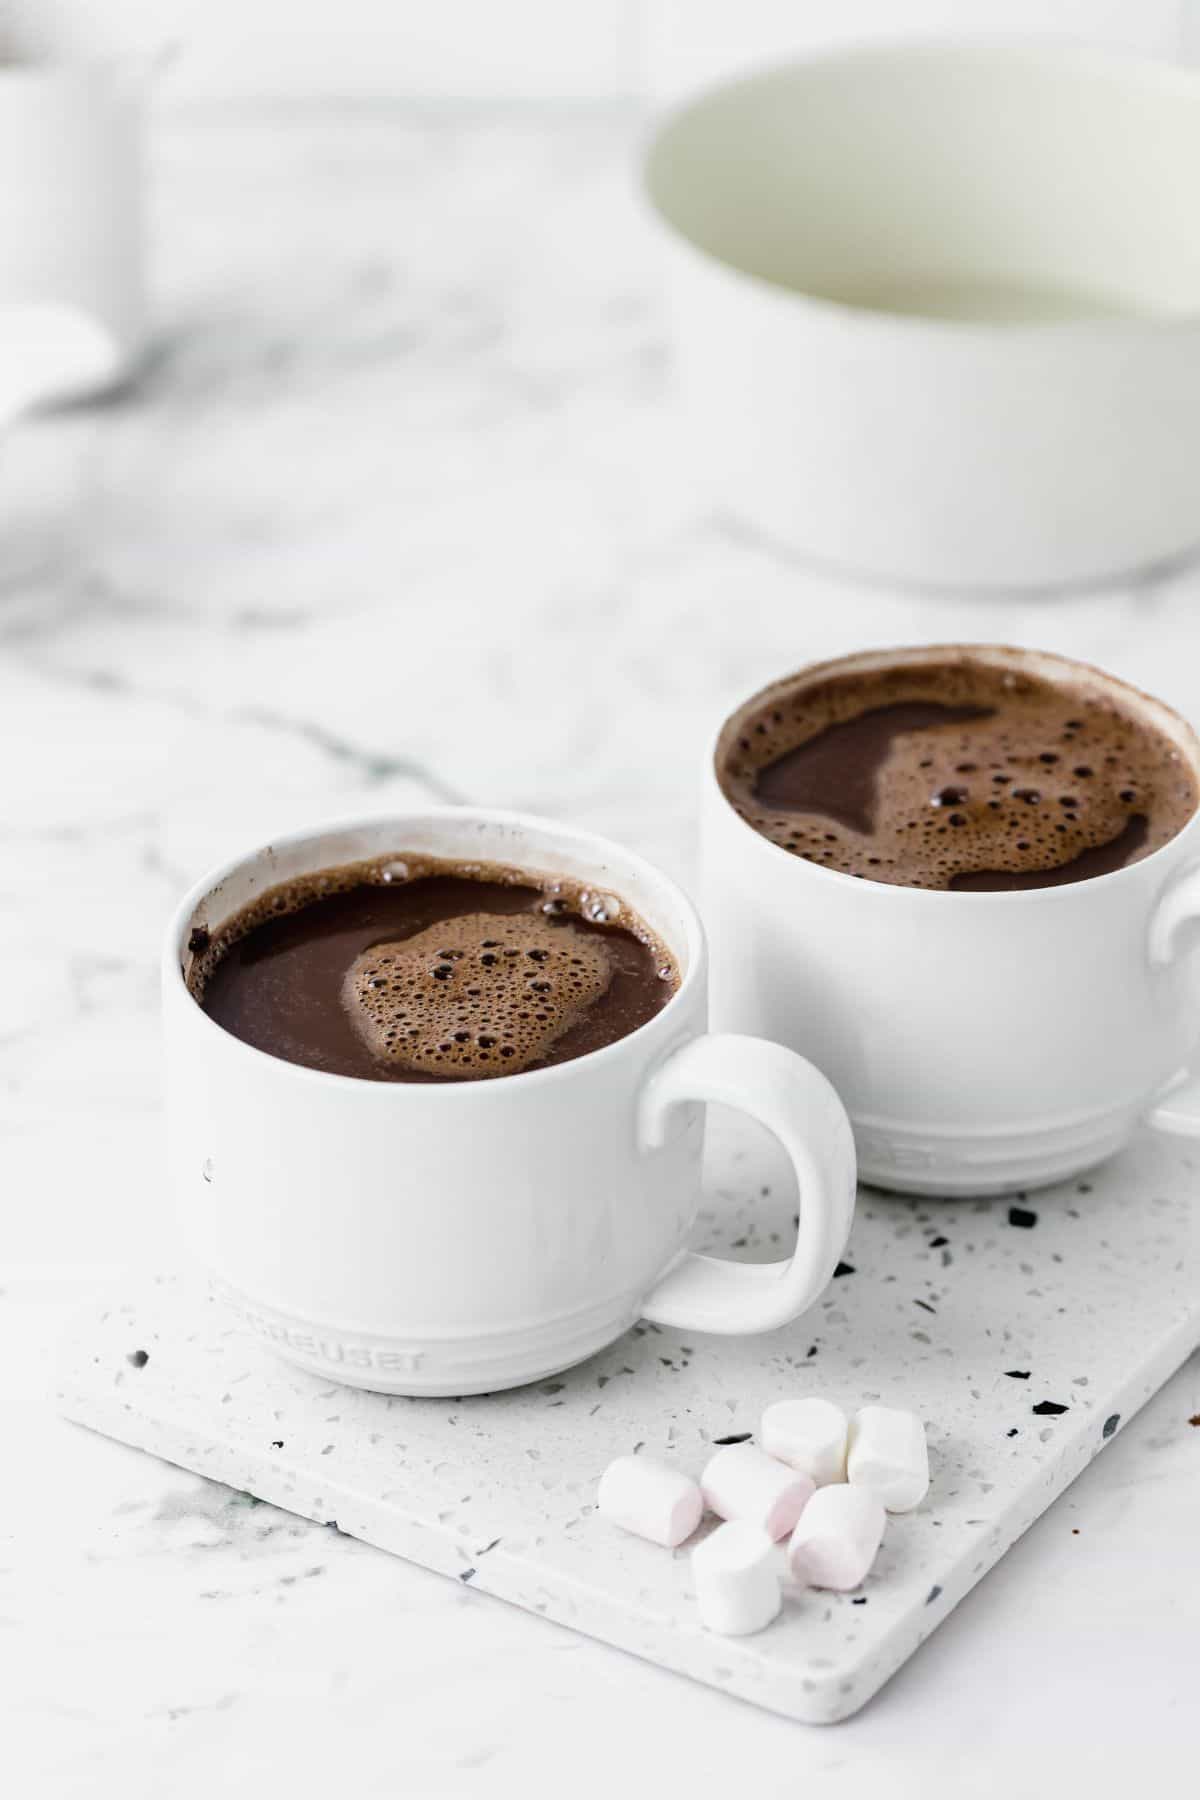 https://homecookedroots.com/wp-content/uploads/2022/11/How-to-Make-Hot-Chocolate-with-Cocoa-Powder-2.jpg